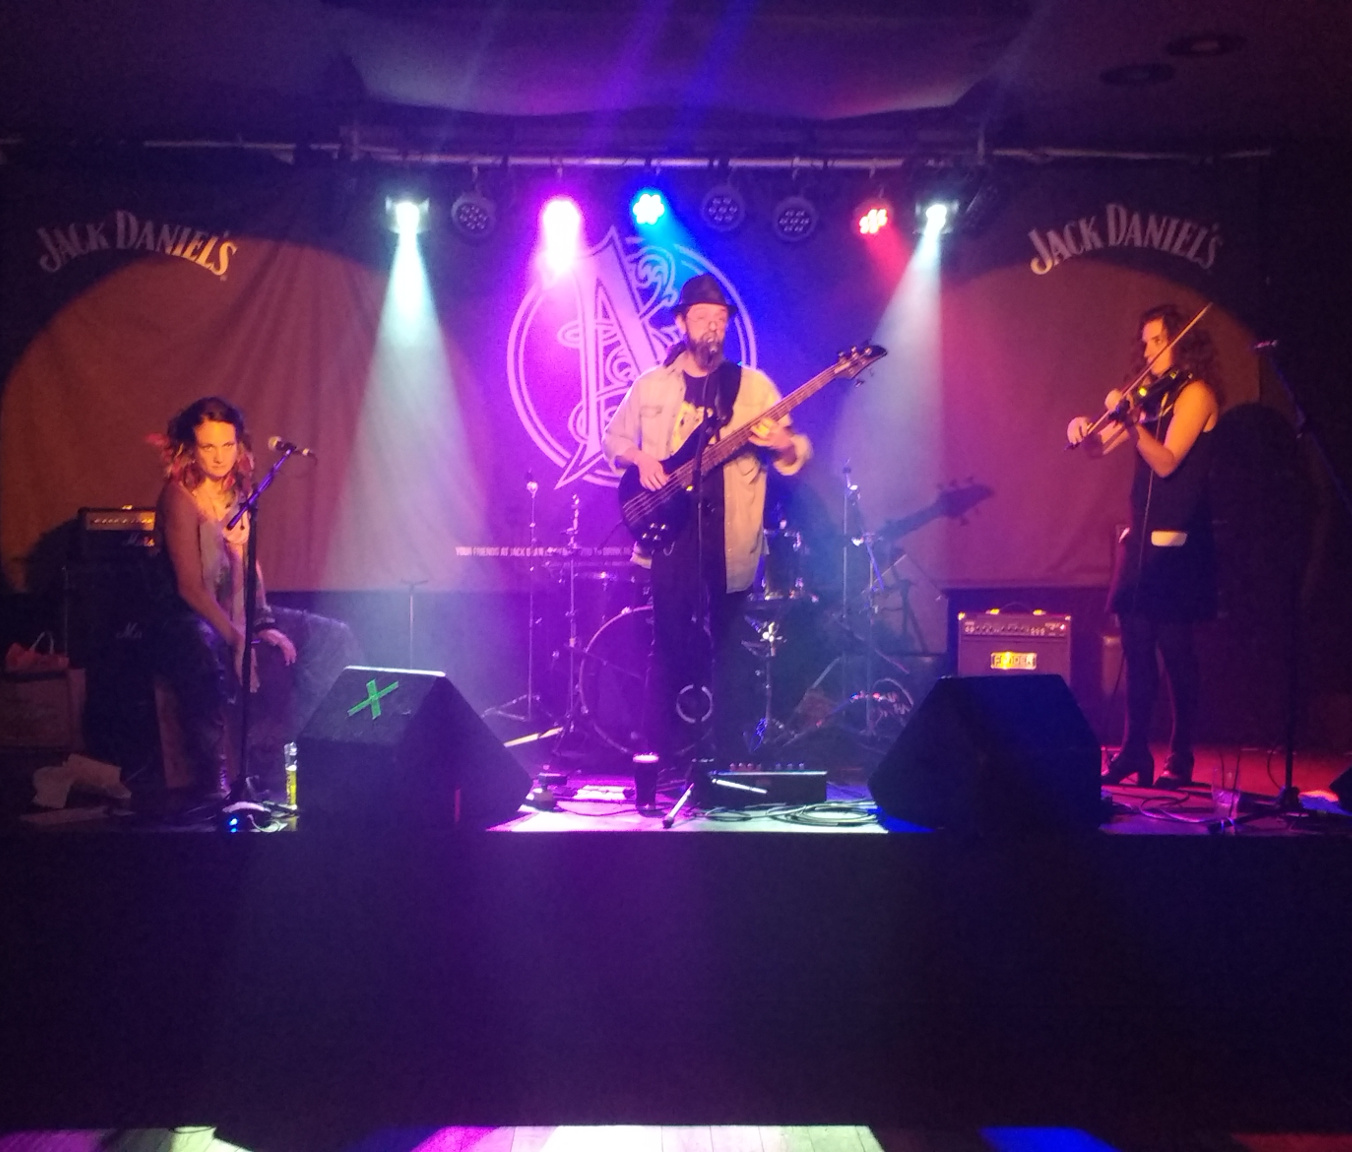 Fit and the Conniptions on the raised and artfully lit stage at Nambucca. Left to right: H on cahon, Wayne on bass and vocals, Hana Piranha on violin.